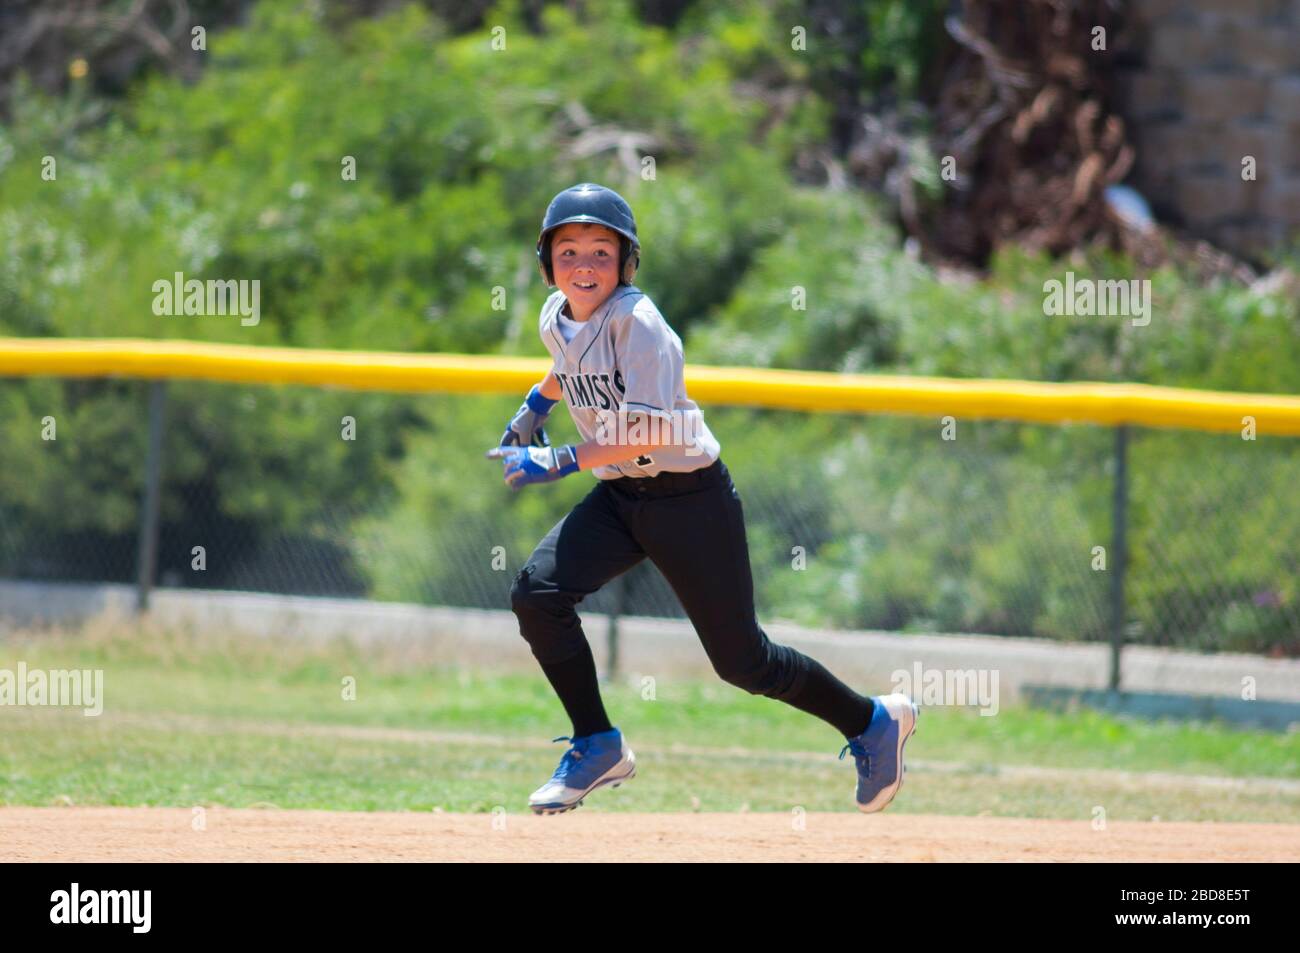 Little League baseball player running with big smile Stock Photo